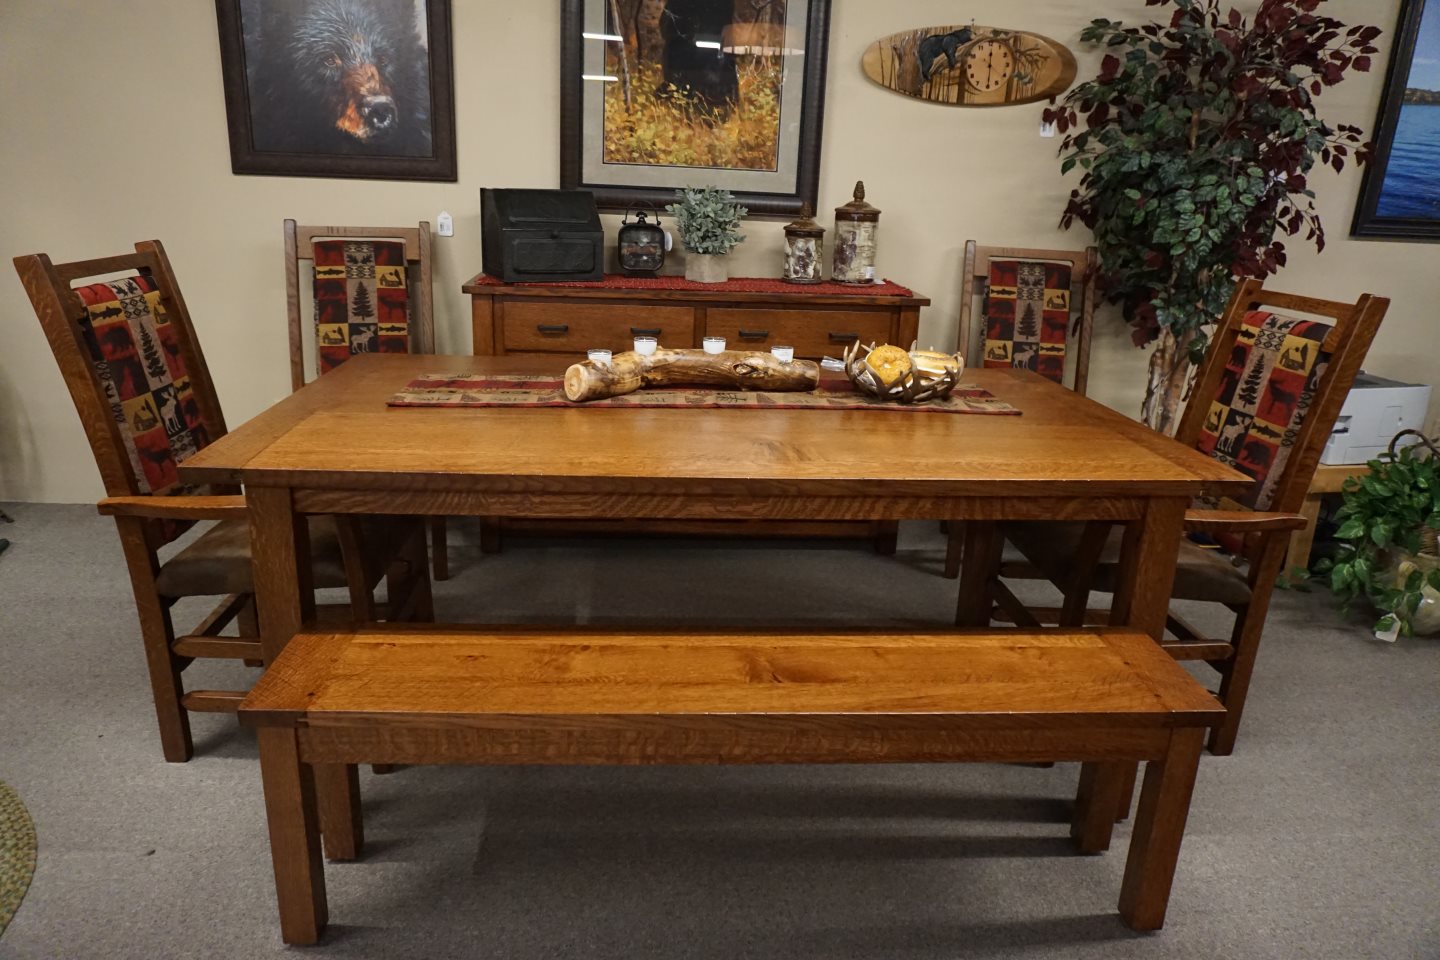 Cornerstone Wood - Amish - Western Plank Dining Table & Chairs